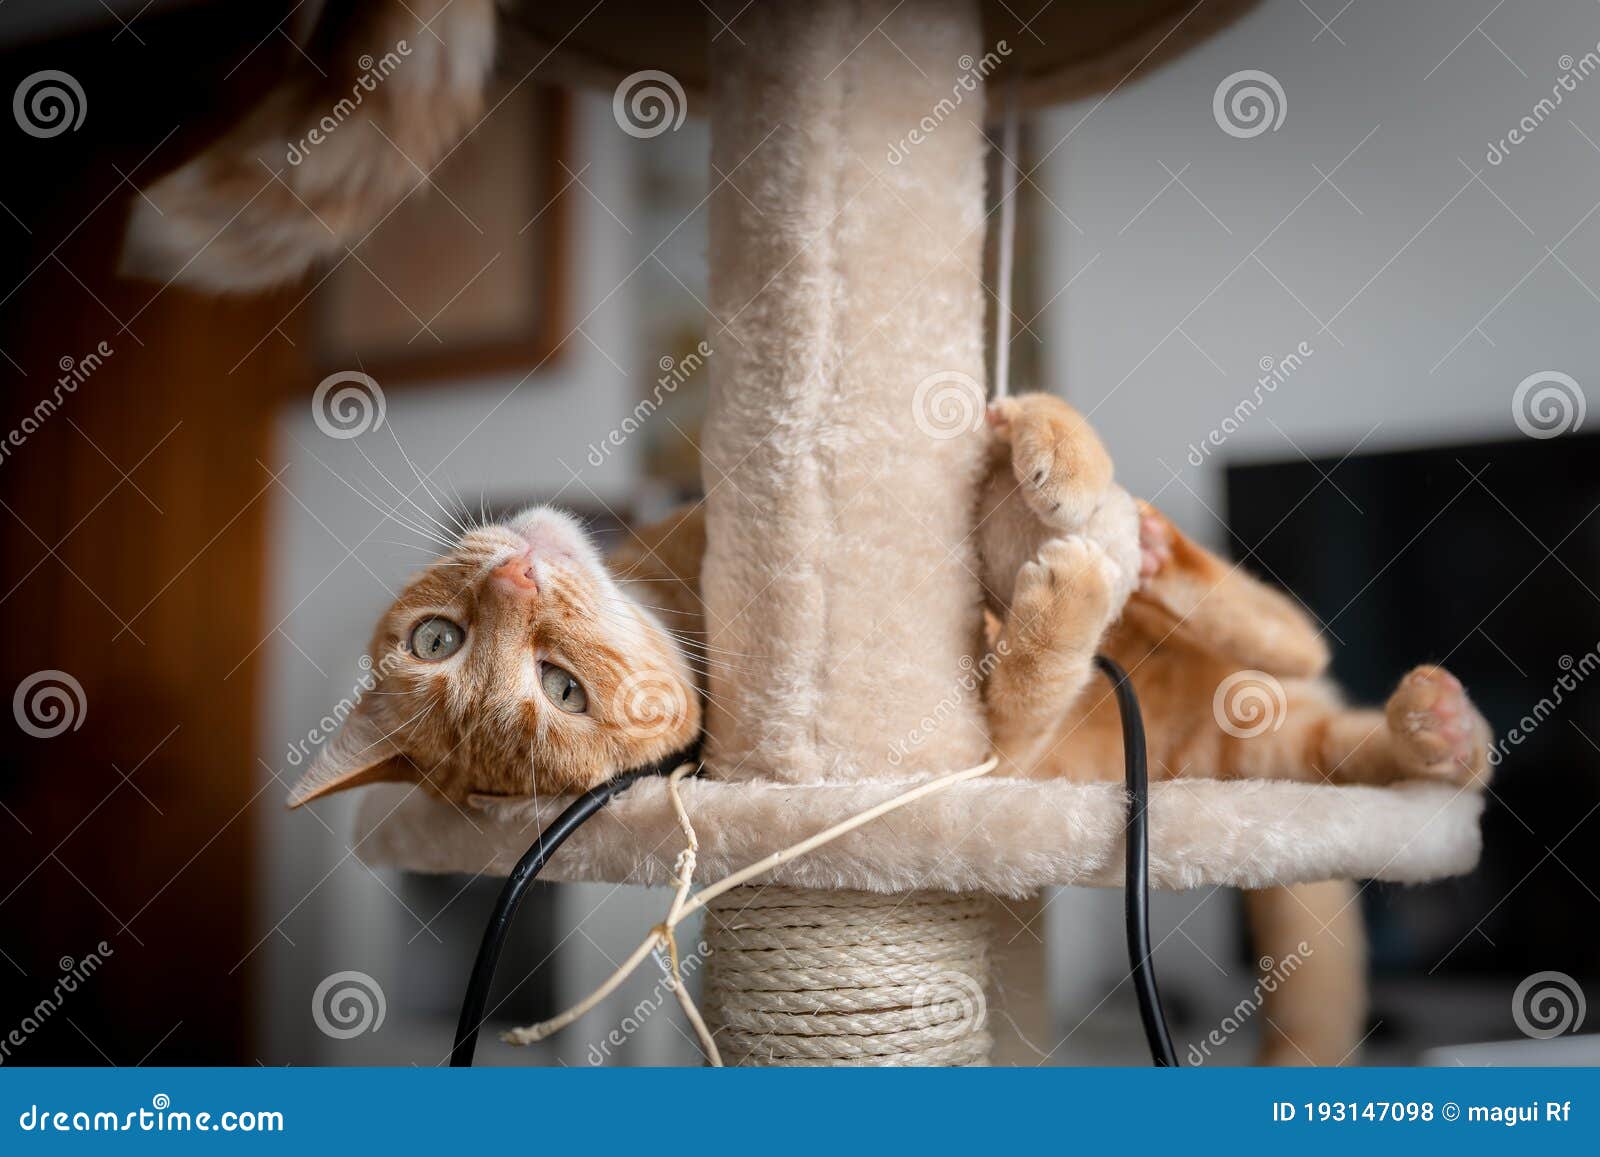 brown tabby cat with green eyes lying on a scratching tower, looks at the camera